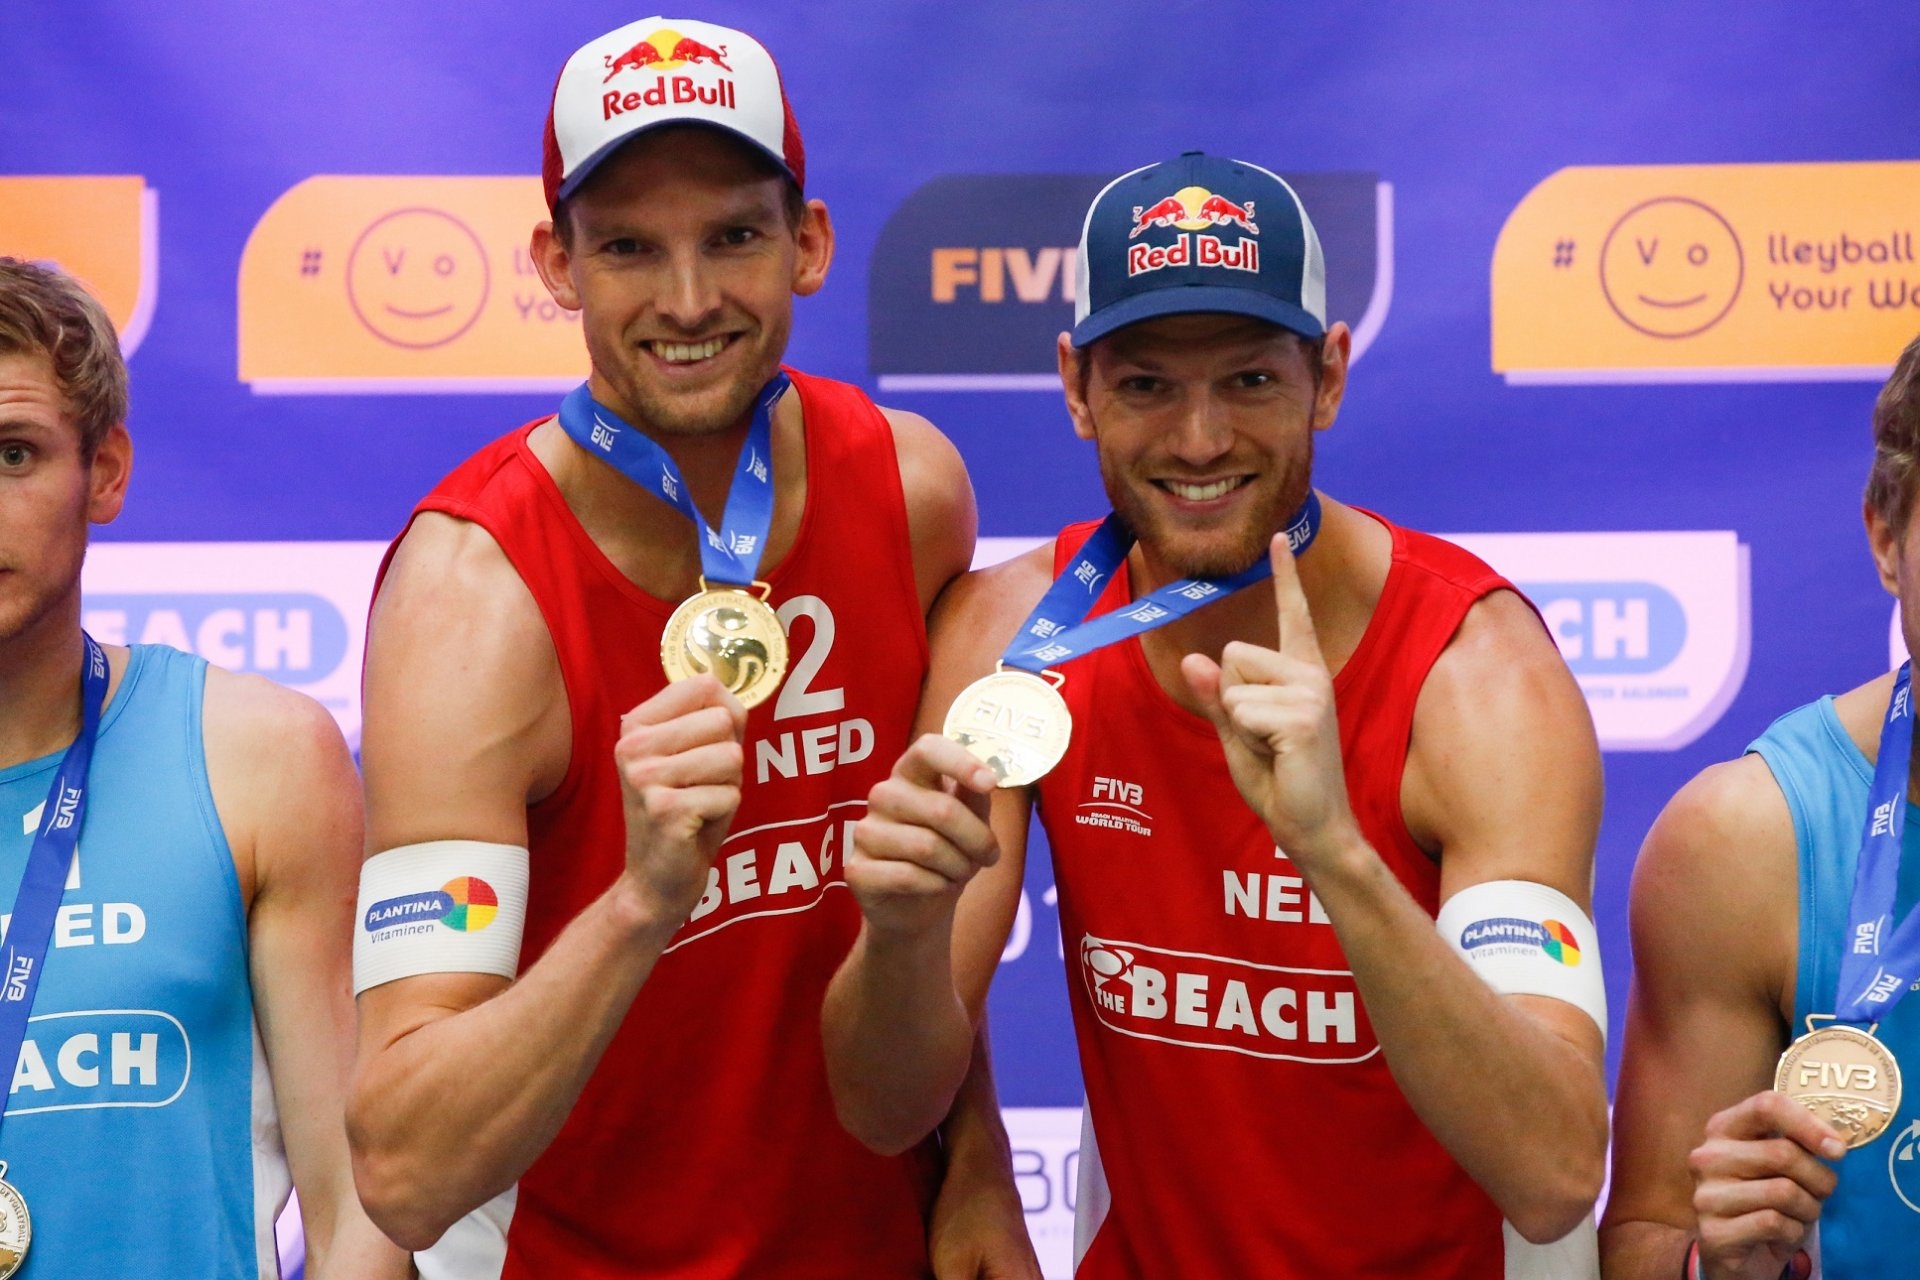 Meeuwsen and Brouwer won their second World Tour gold medal in eight days (Photocredit: FIVB)